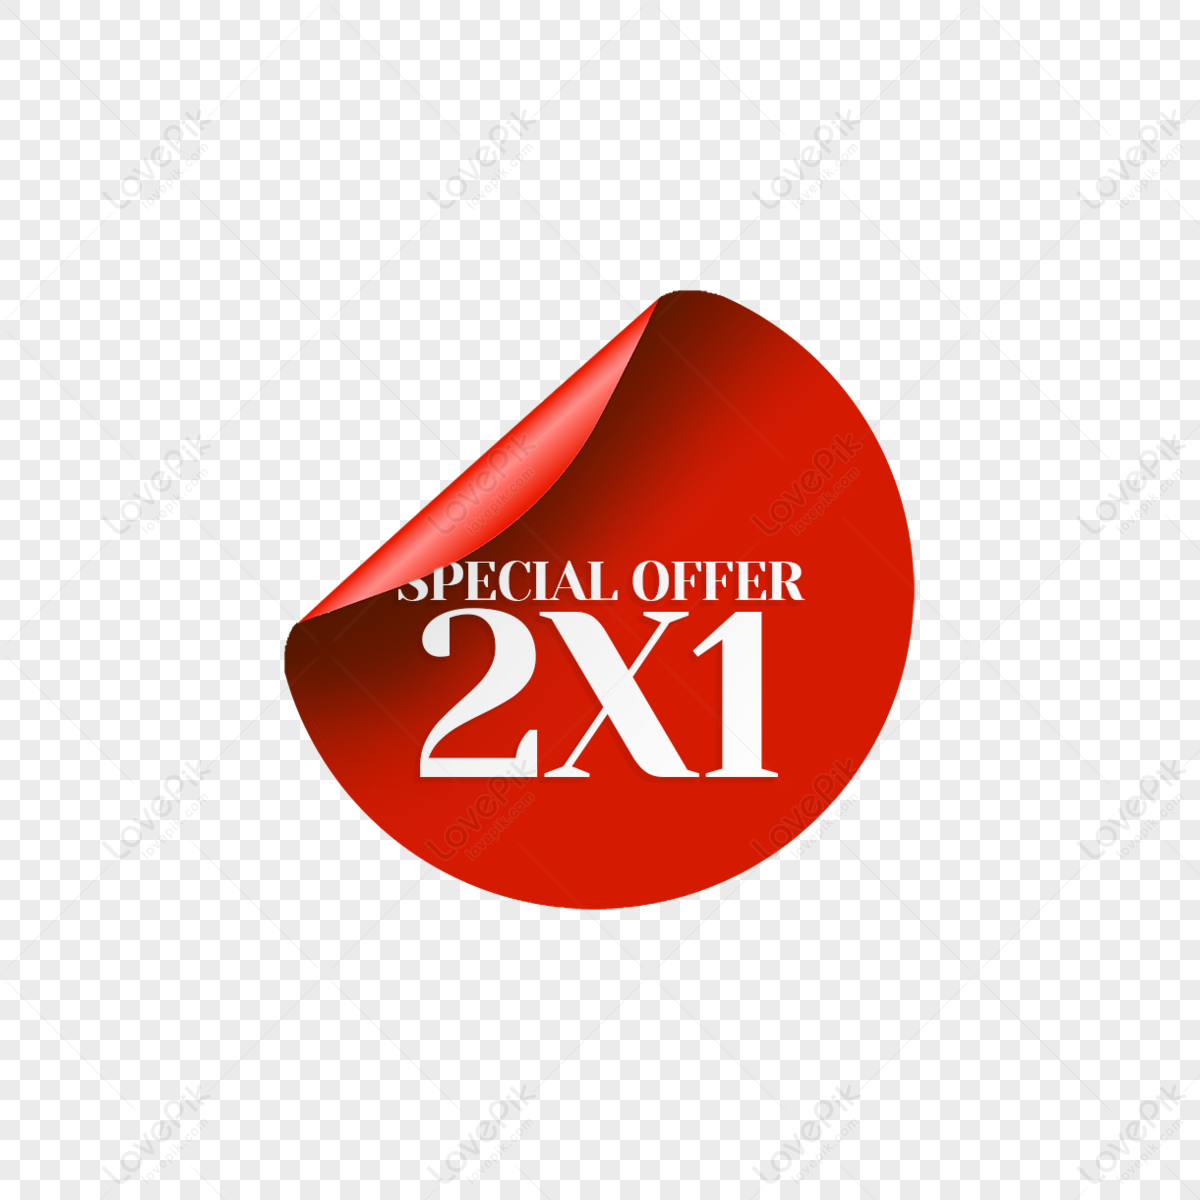 Special offer colour backgrounds Royalty Free Vector Image